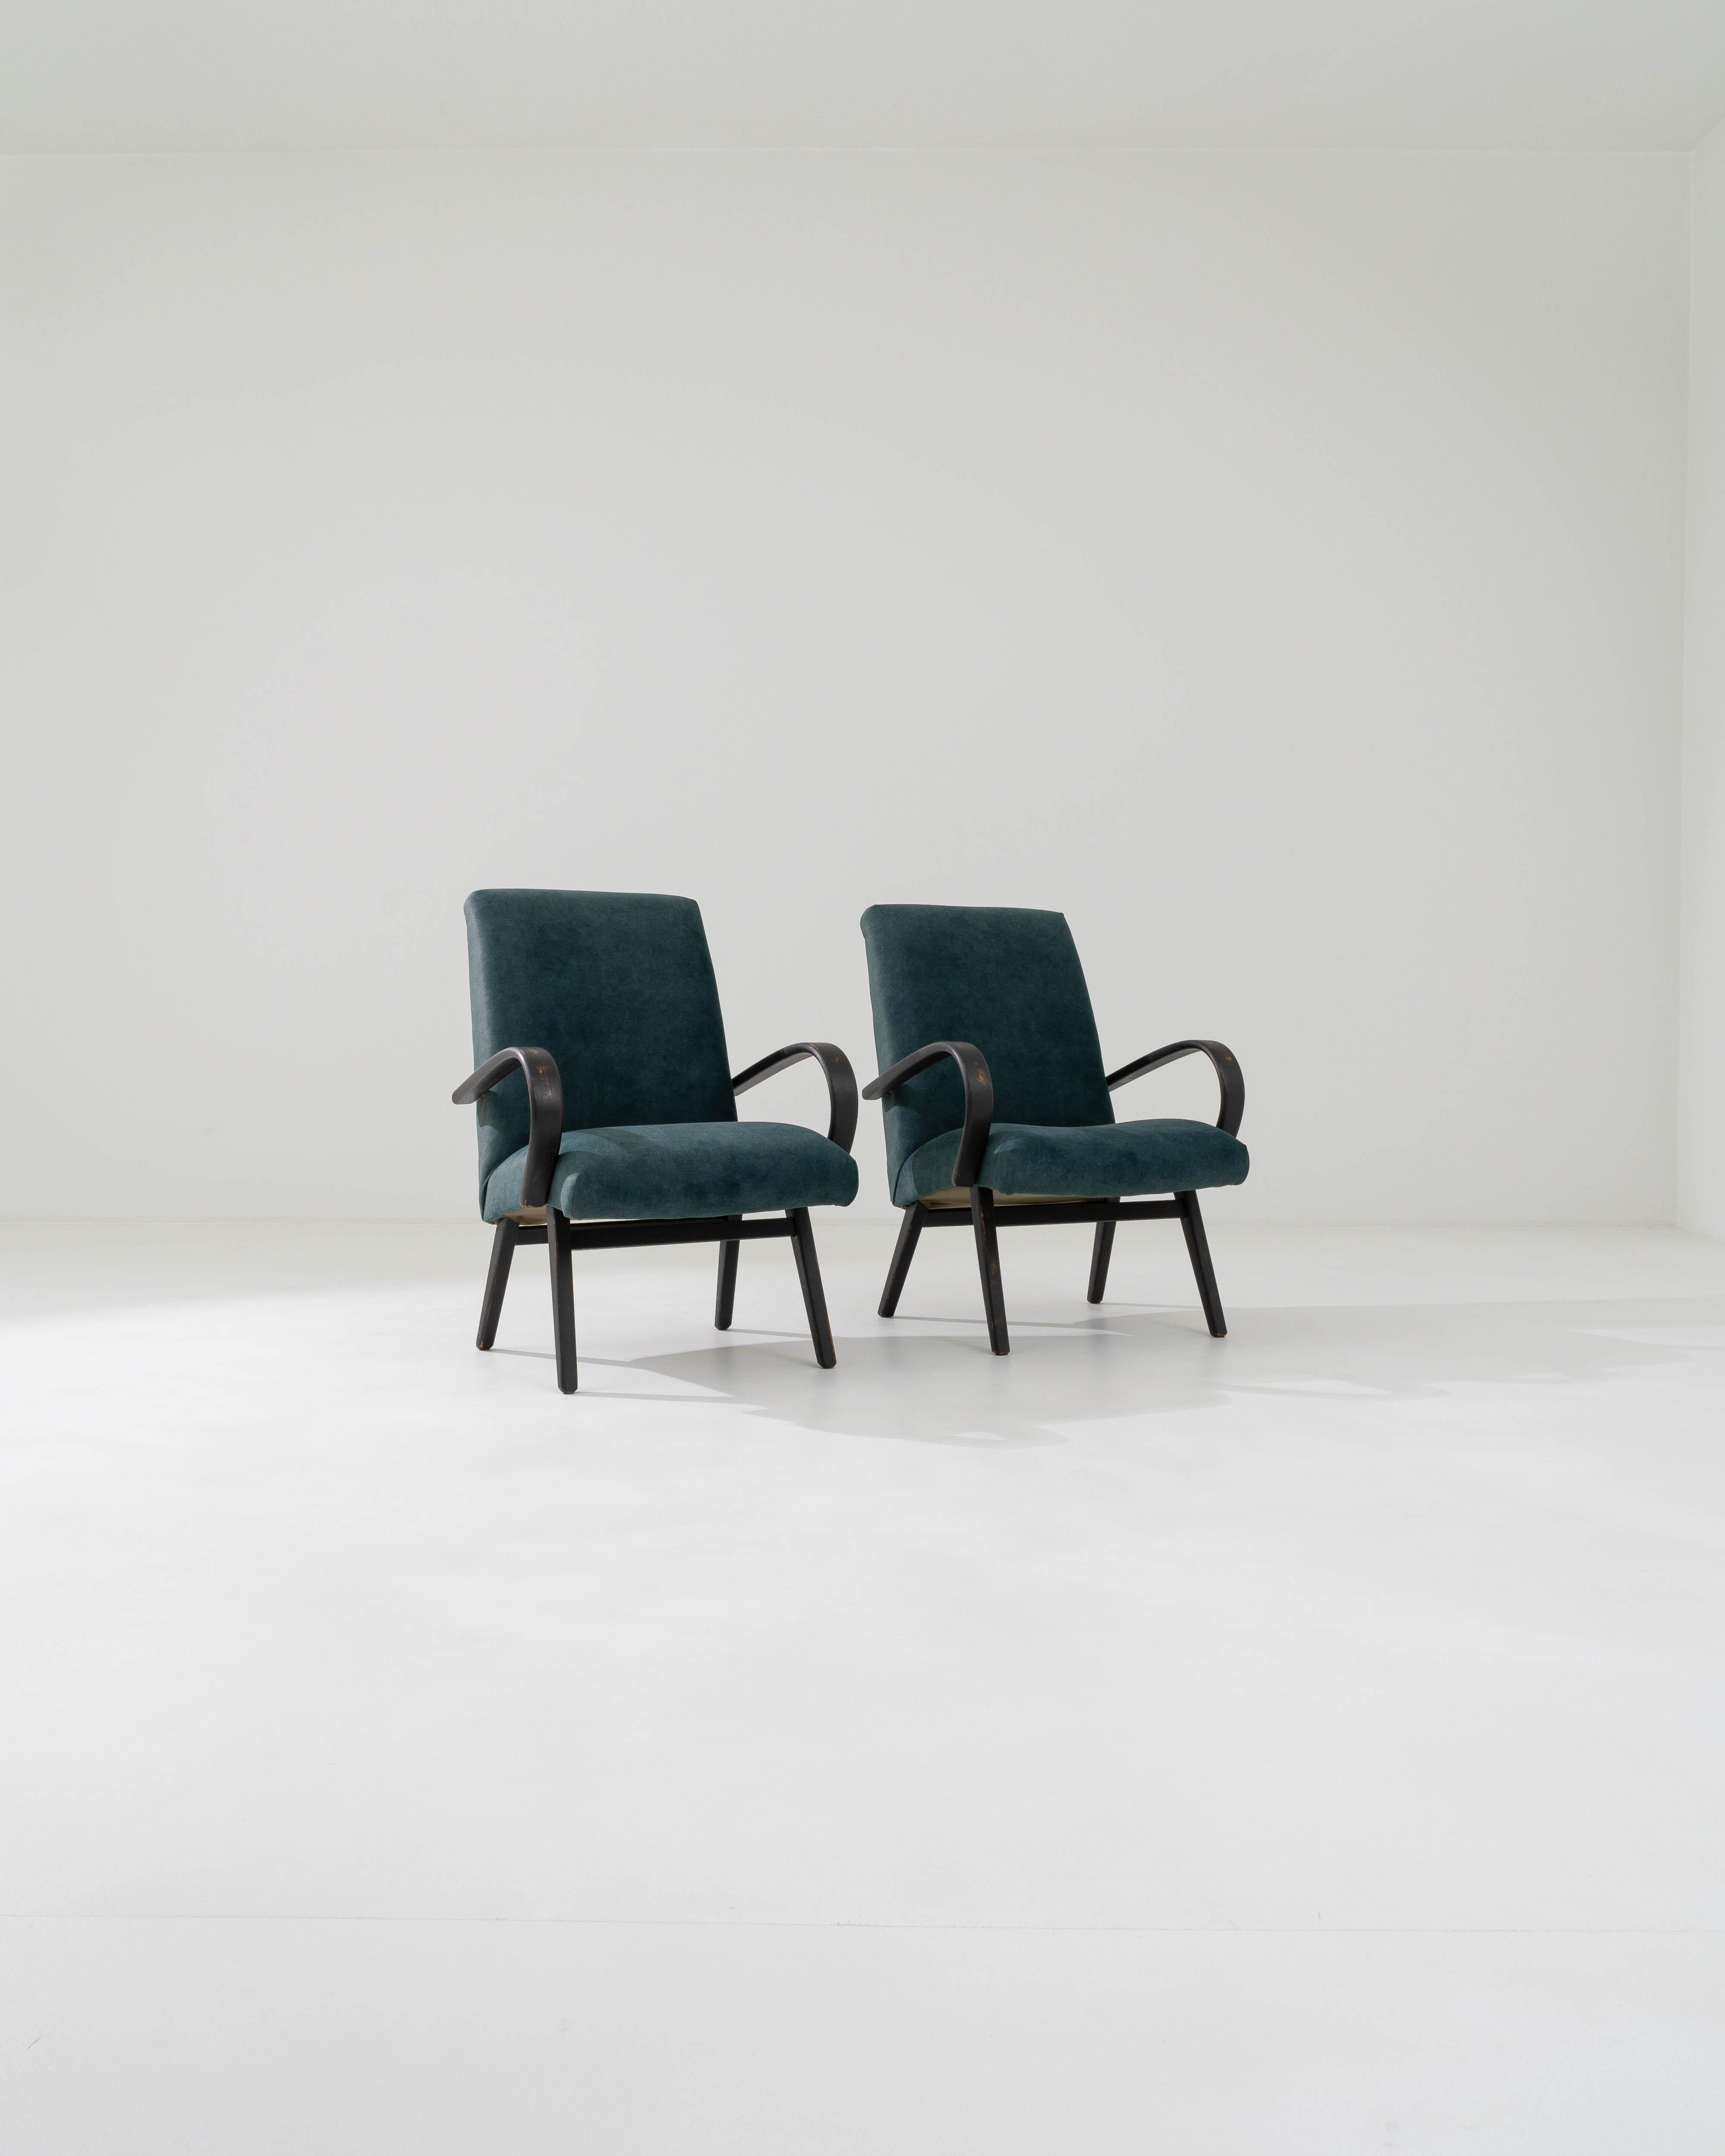 A piece from J. Halabala, a top mind who played a pivotal role in the design industry in the Eastern Bloc. This pair of highly collectible armchairs are upholstered in a beautiful velvet that iridescences from light to dark blue with a distinctive